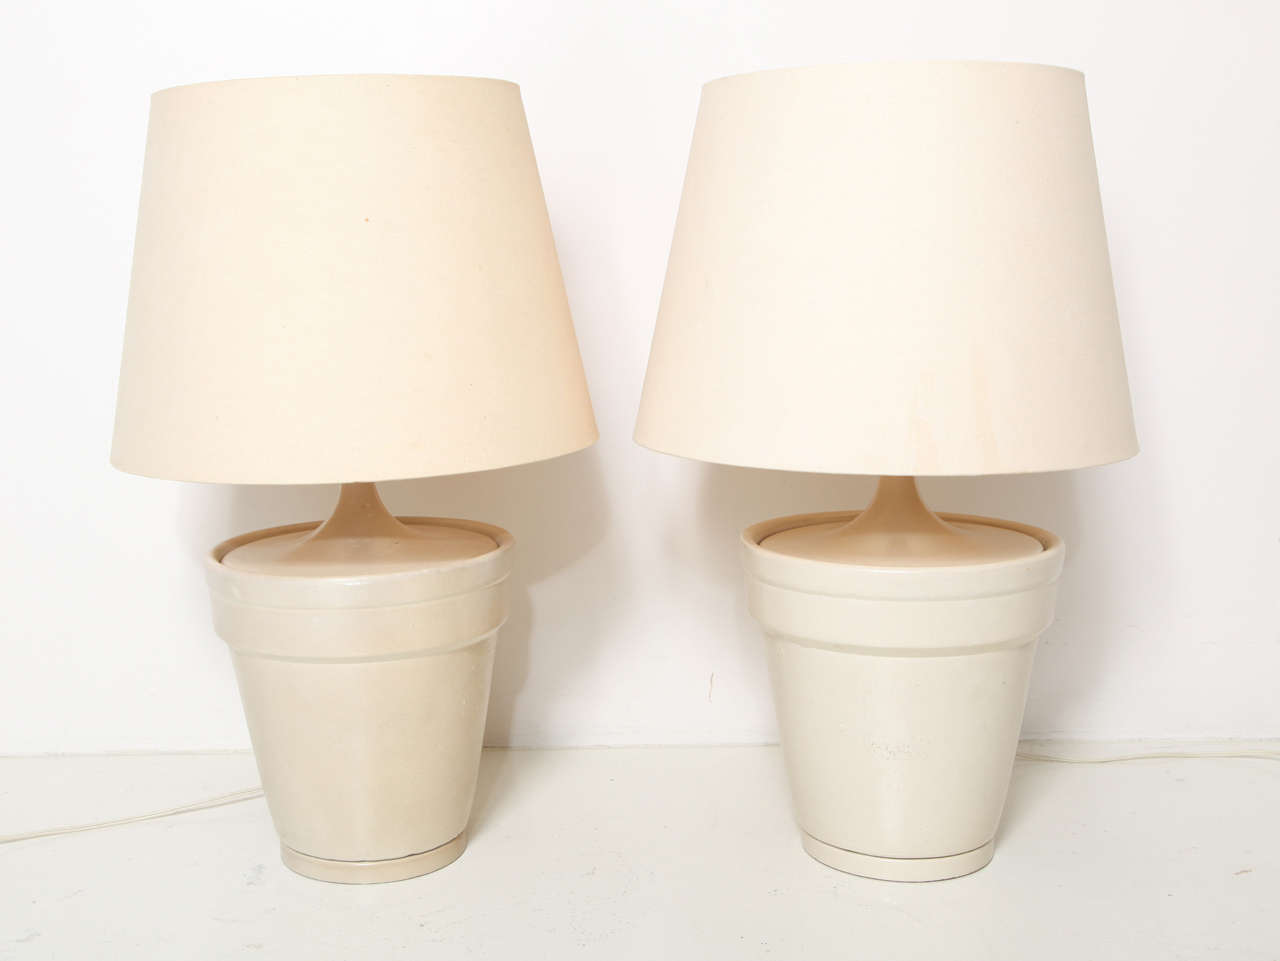 JOHN DICKINSON  (1920-1982)
Pair of painted terracotta lamps with wood fittings.
American, c. 1965
PROVENANCE:
Residence of Mr. and Mrs. Donald Magnin, San Francisco, CA
MEASUREMENTS:
11